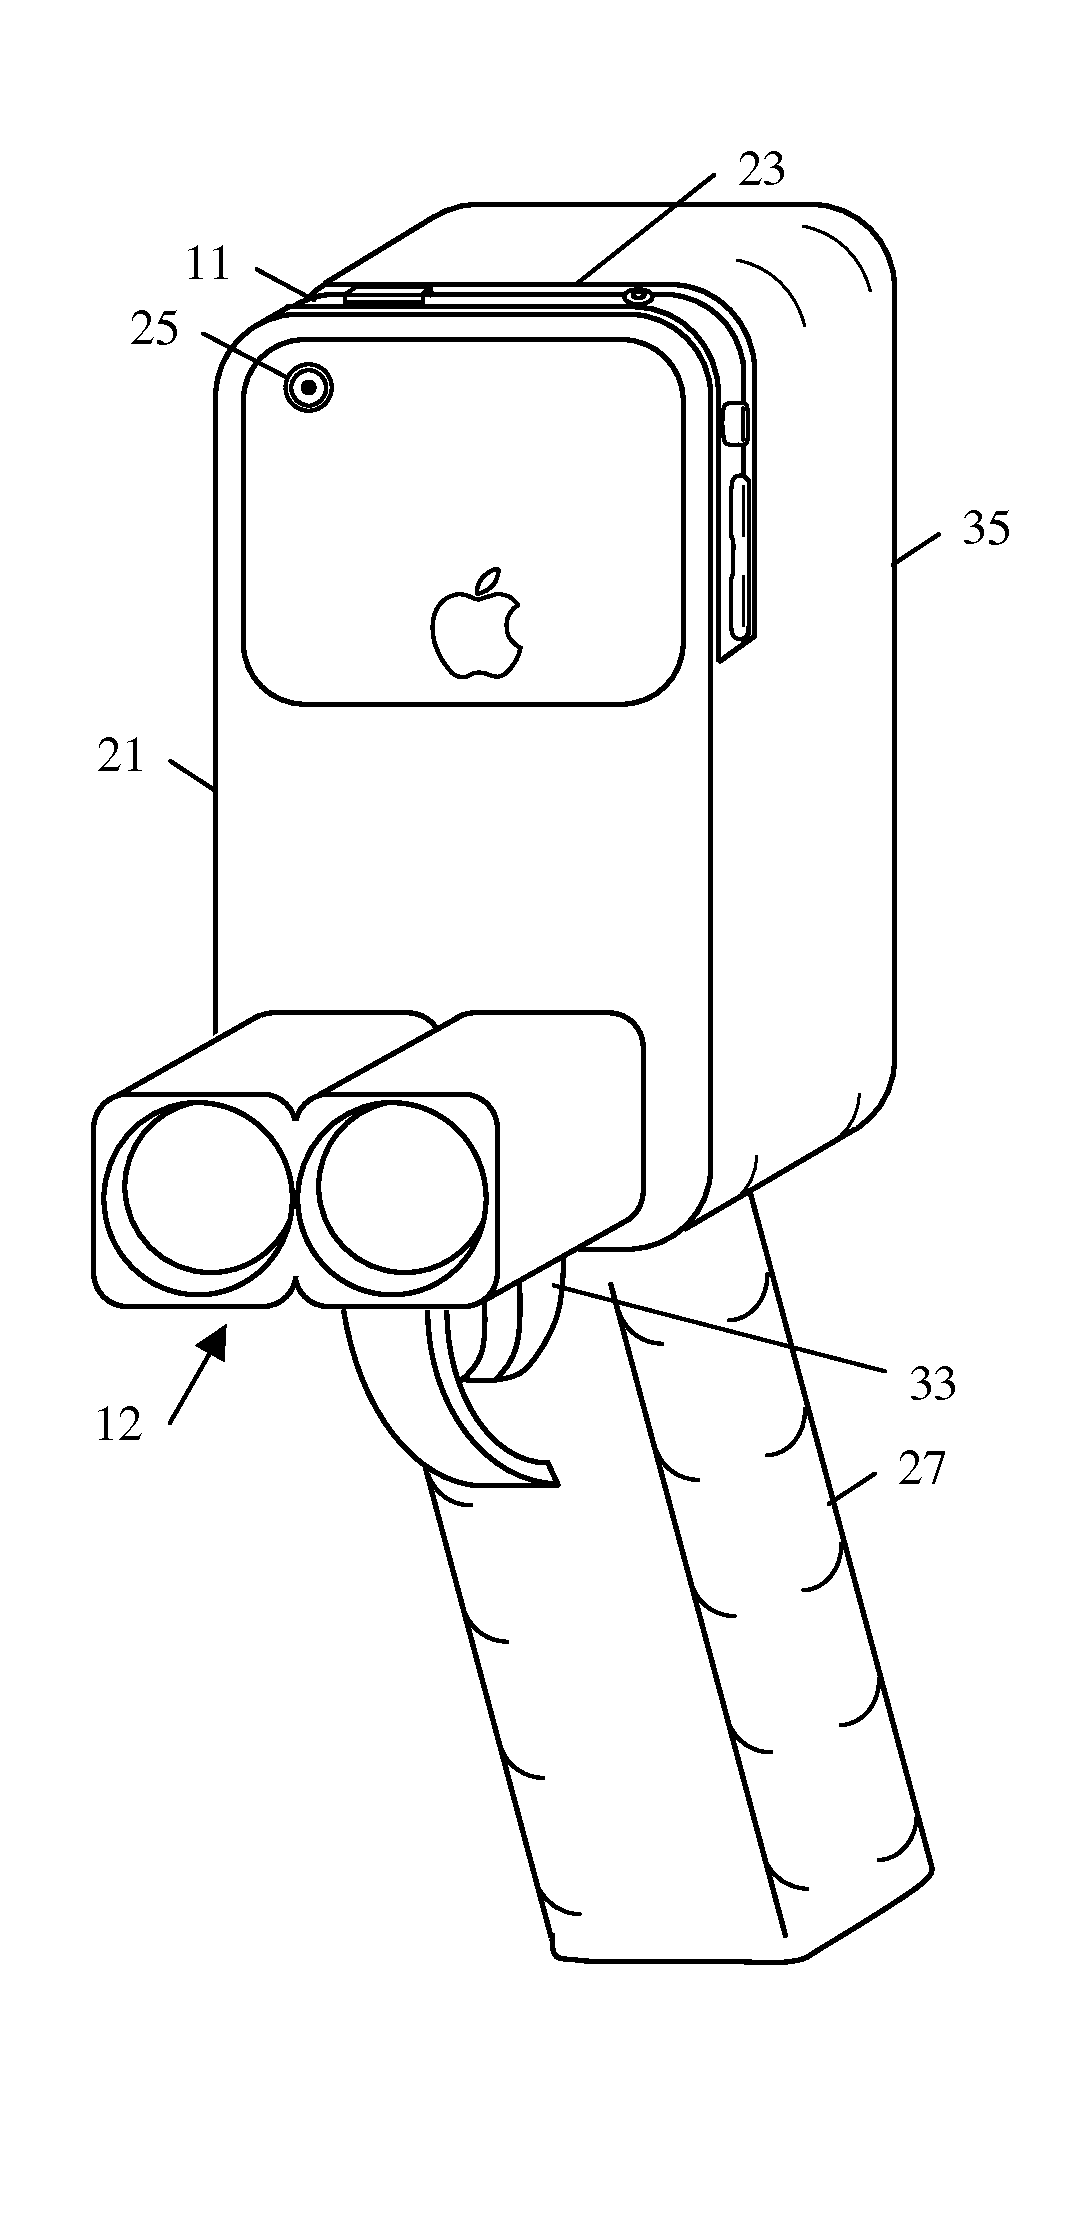 Display, Device, Method, and Computer Program for Indicating a Clear Shot